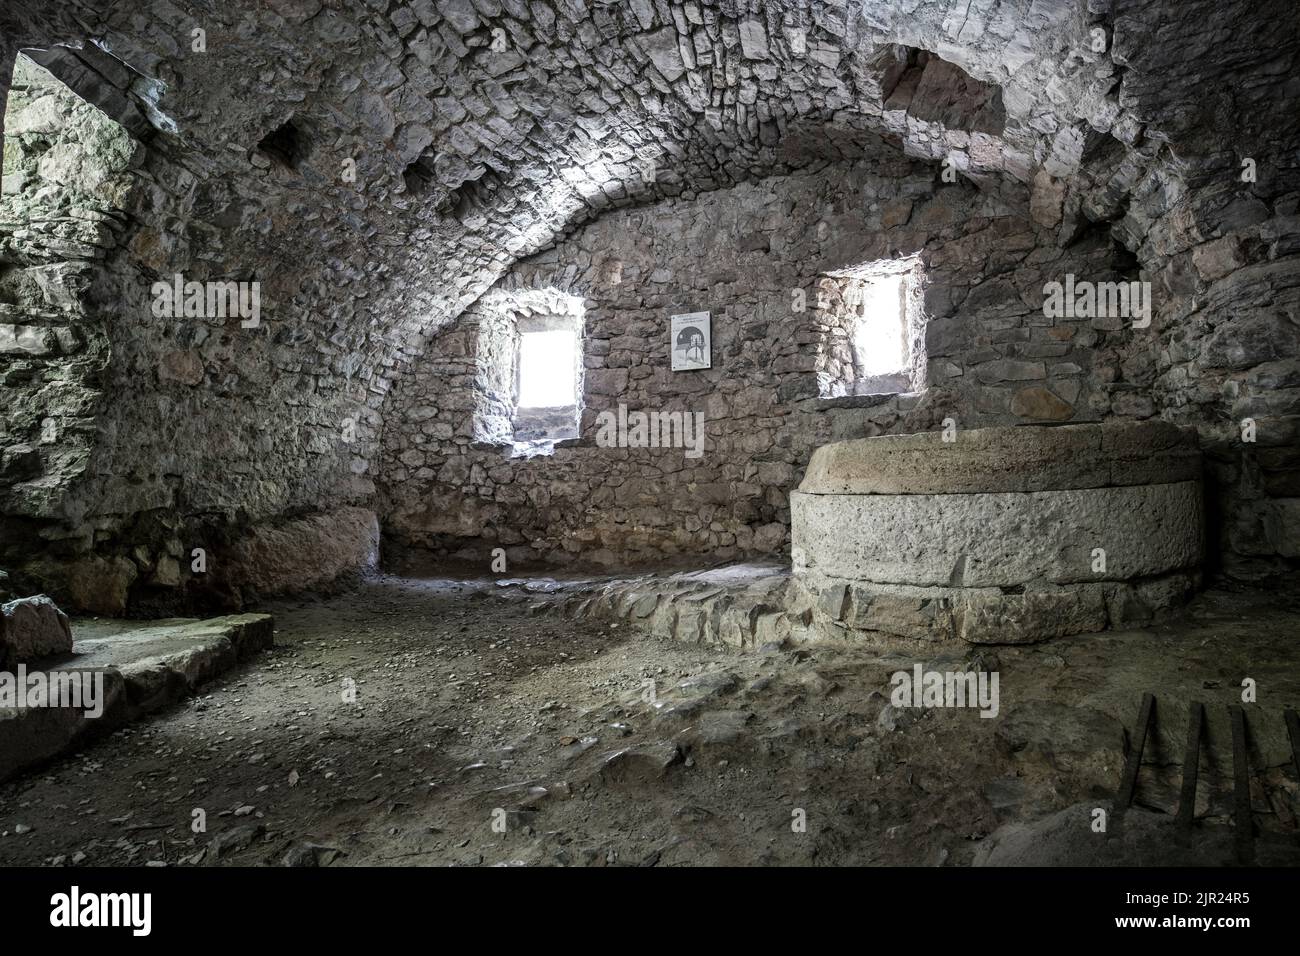 Interior view of the Moulin de la Foux located at the Resurgence of the Vis River near Vissec, Languedoc-Roussillon, France Stock Photo